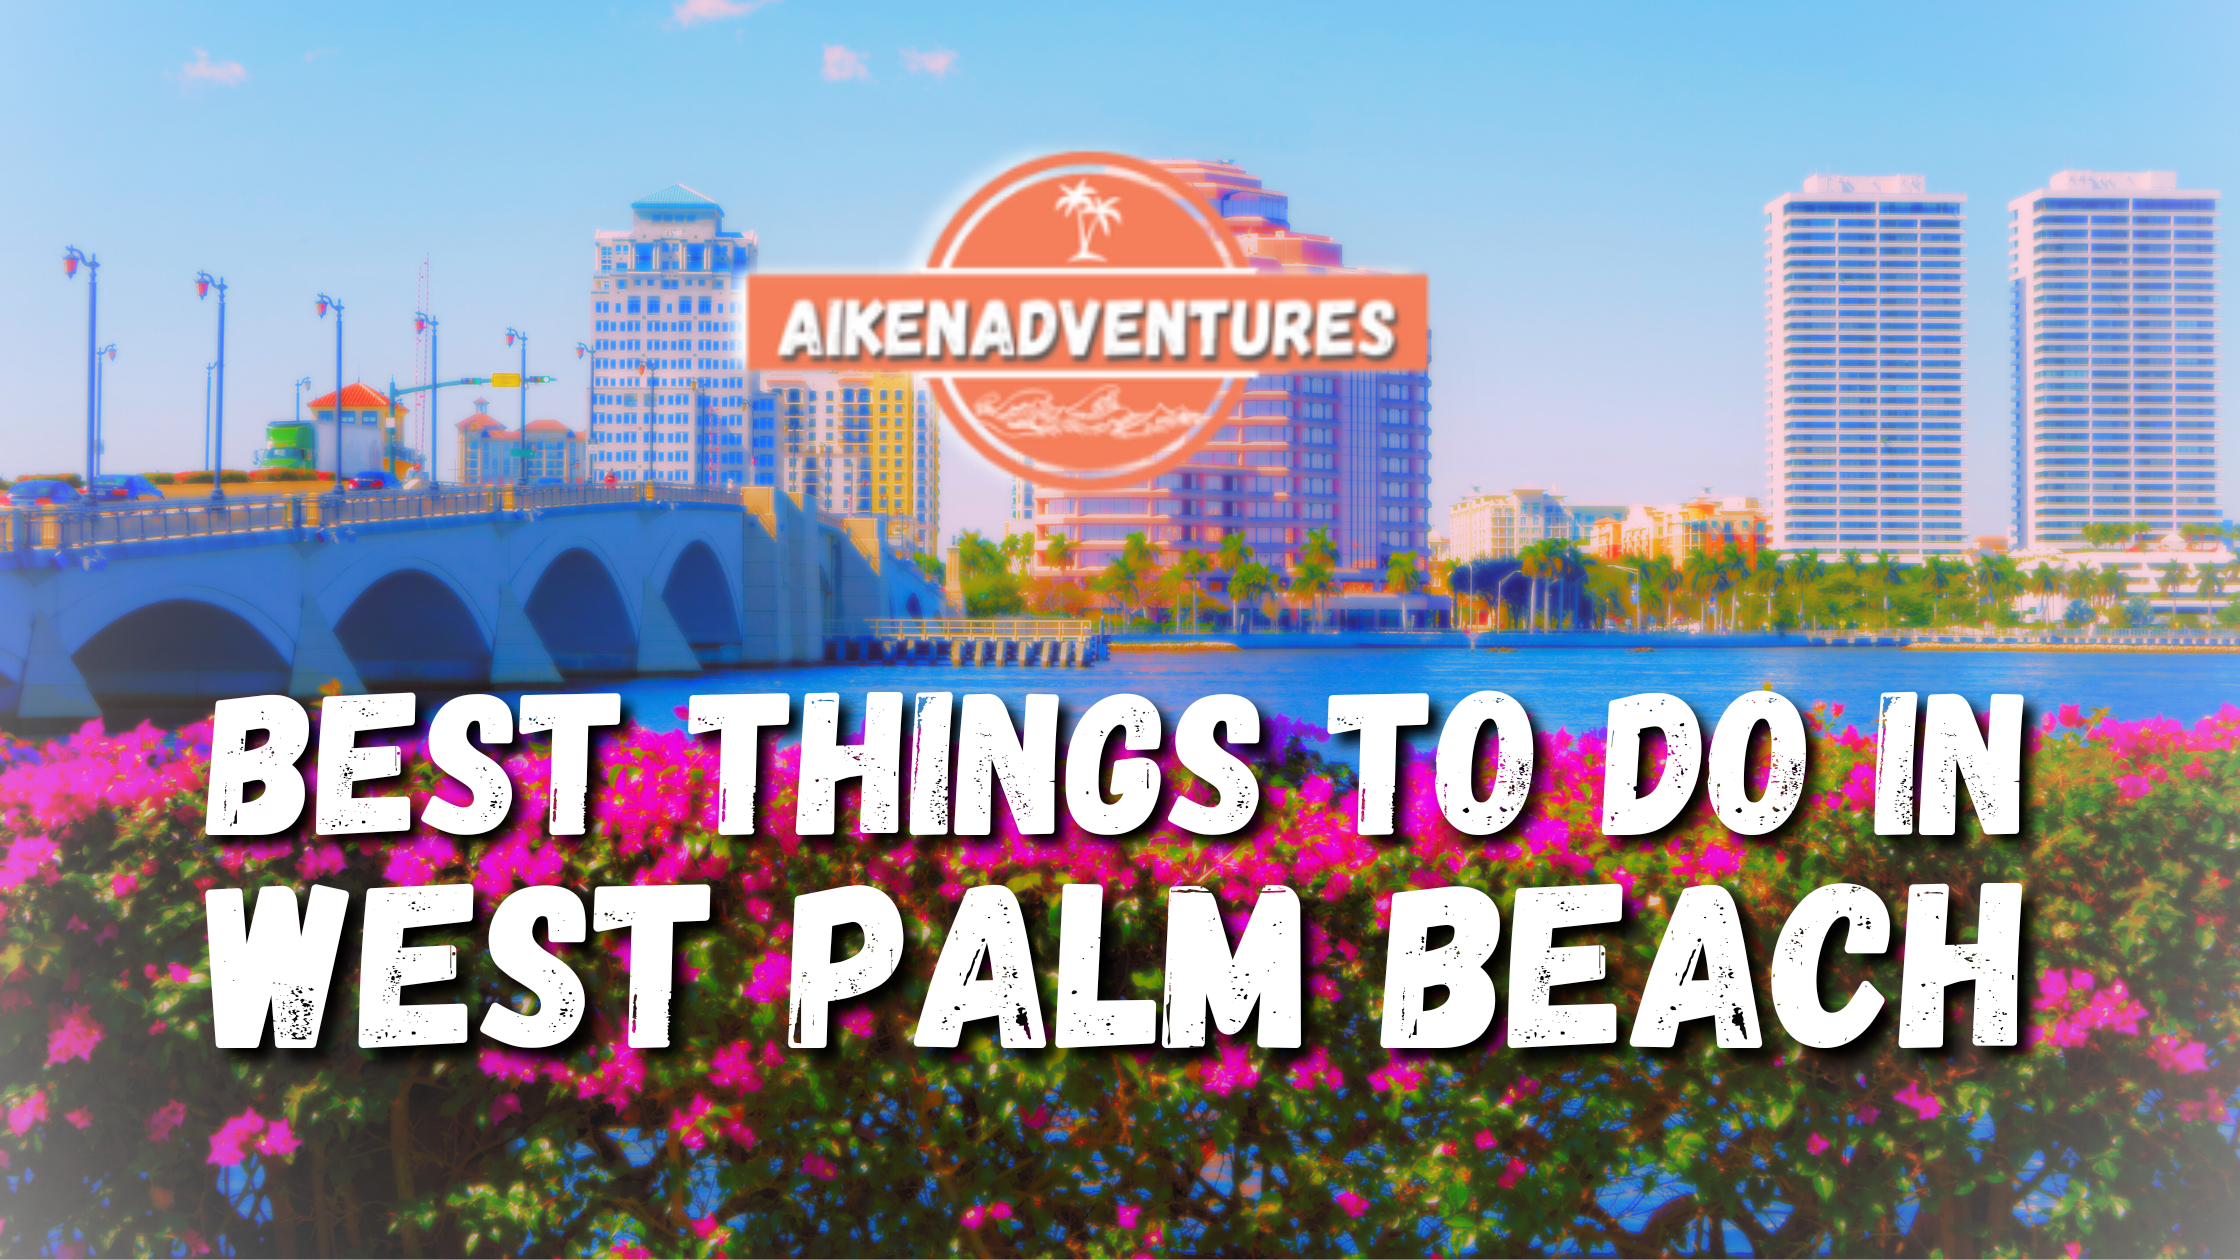 Best Things to do in West Palm Beach, Florida